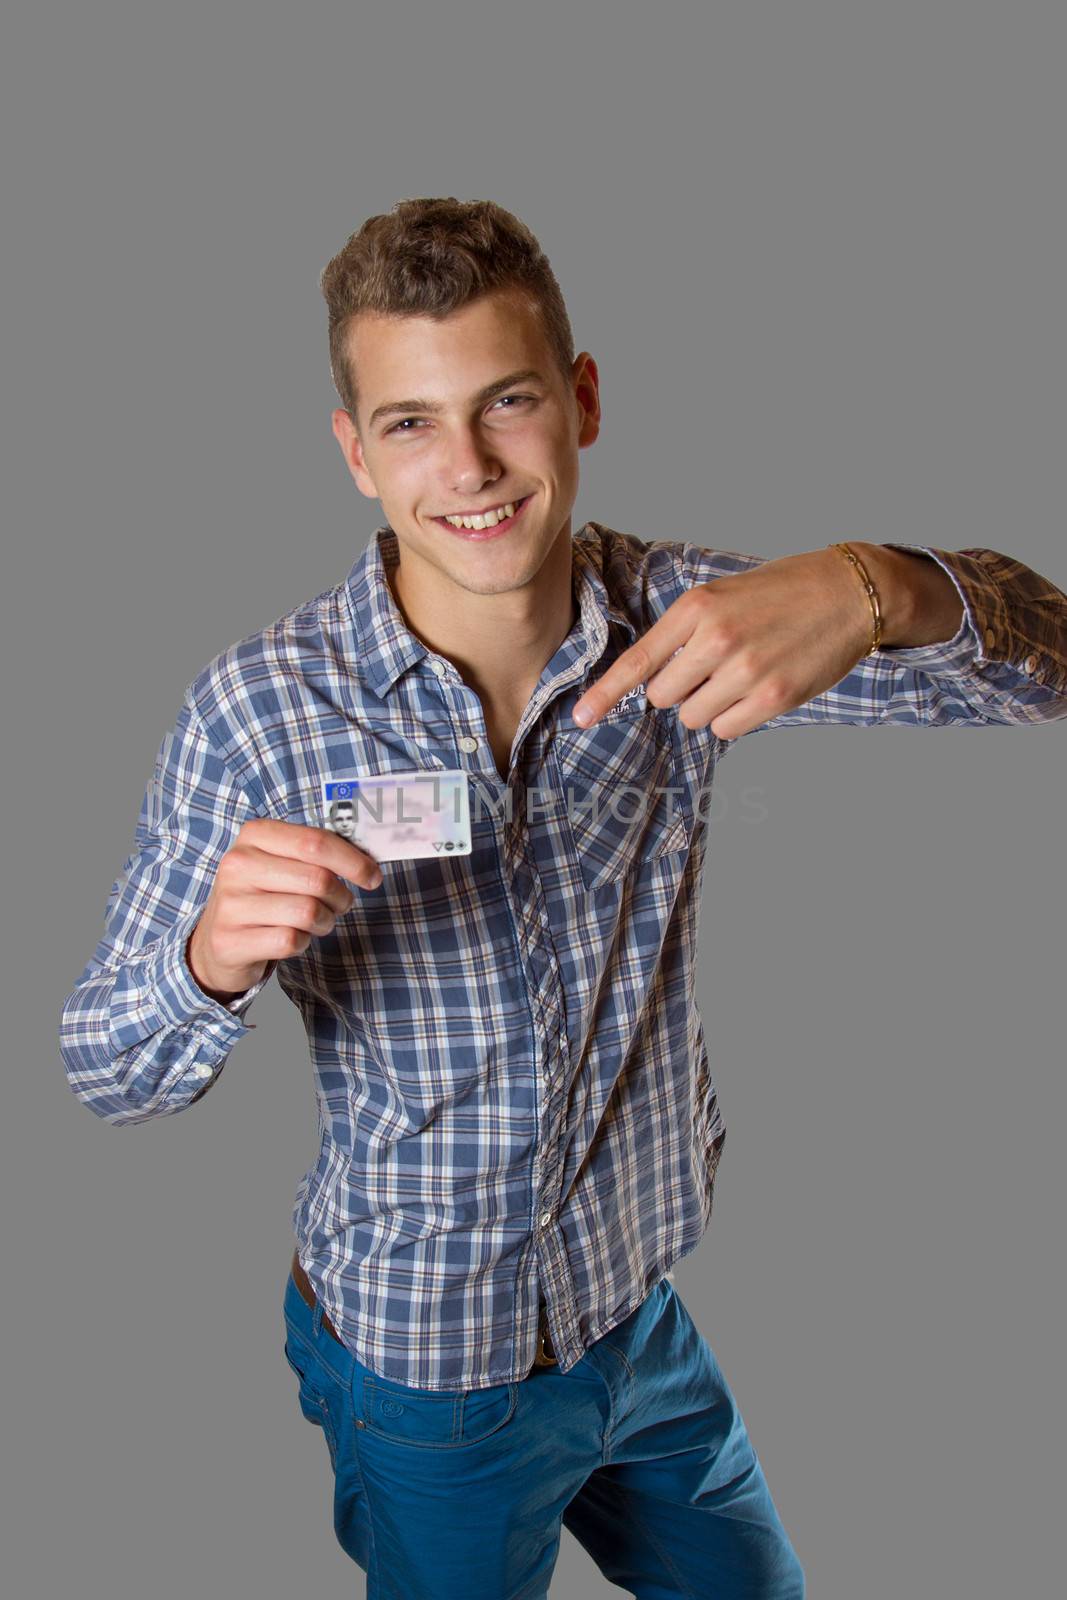 Young man showing off his driver license by Cursedsenses